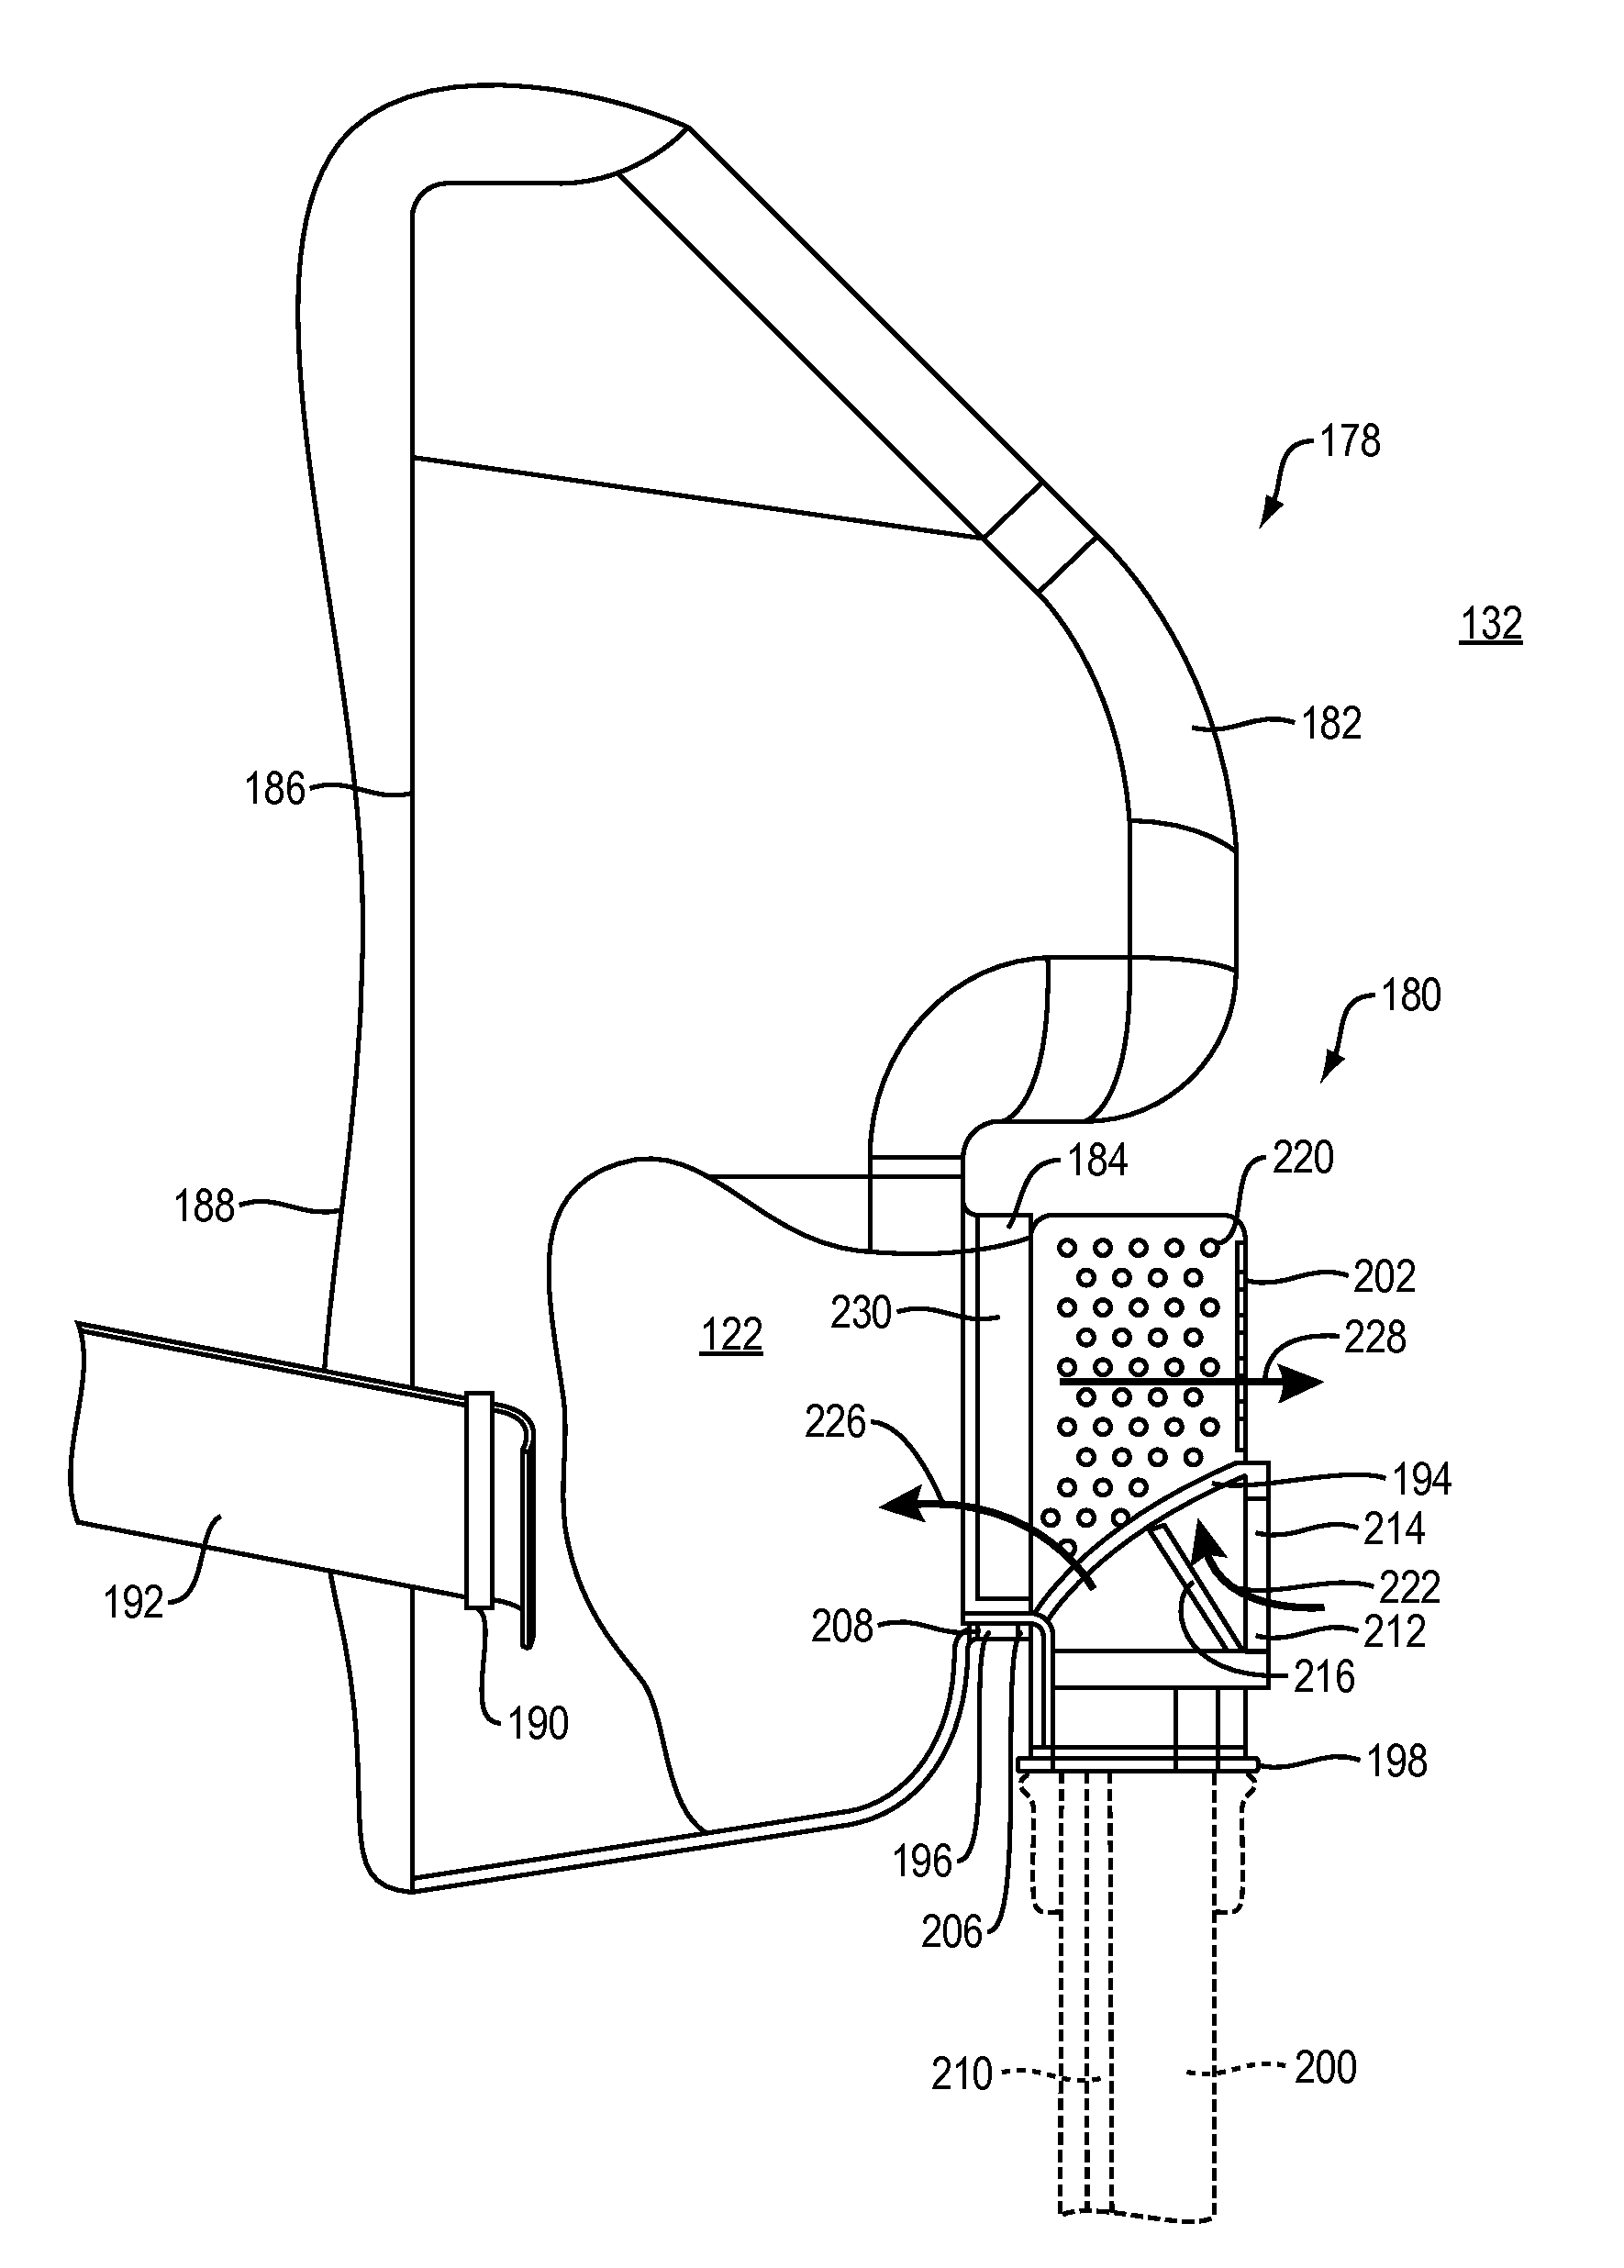 CPAP system with heat moisture exchange (HME) and multiple channel hose